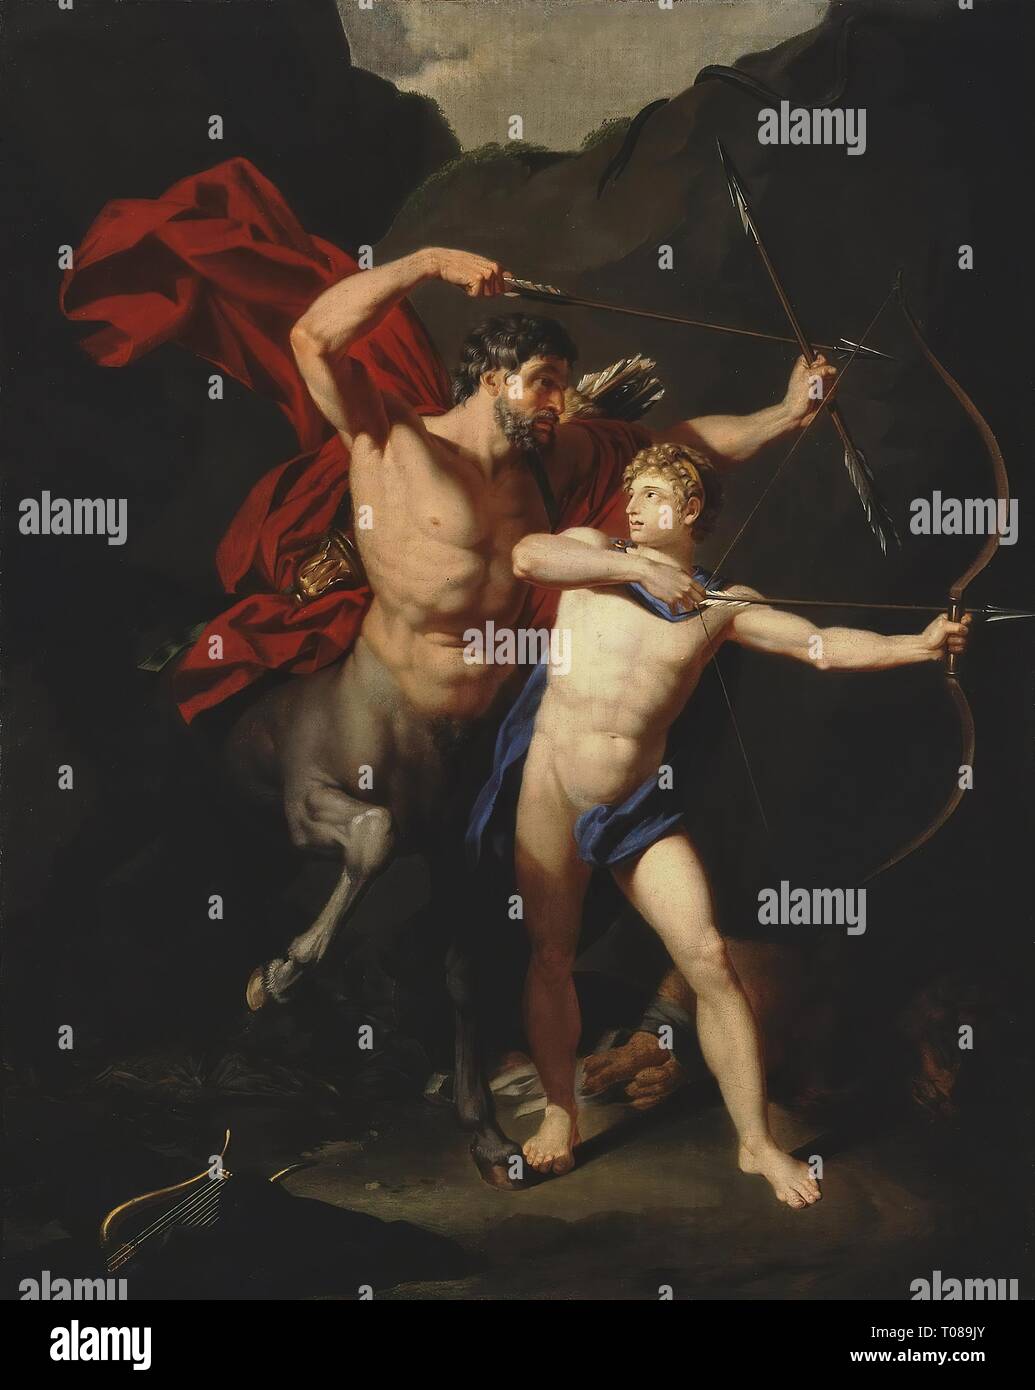 'Education of Achilles by the Centaur Chiron'. France, Circa 1782. Dimensions: 66x53 cm. Museum: State Hermitage, St. Petersburg. Author: Jean-Baptiste Regnault. Stock Photo